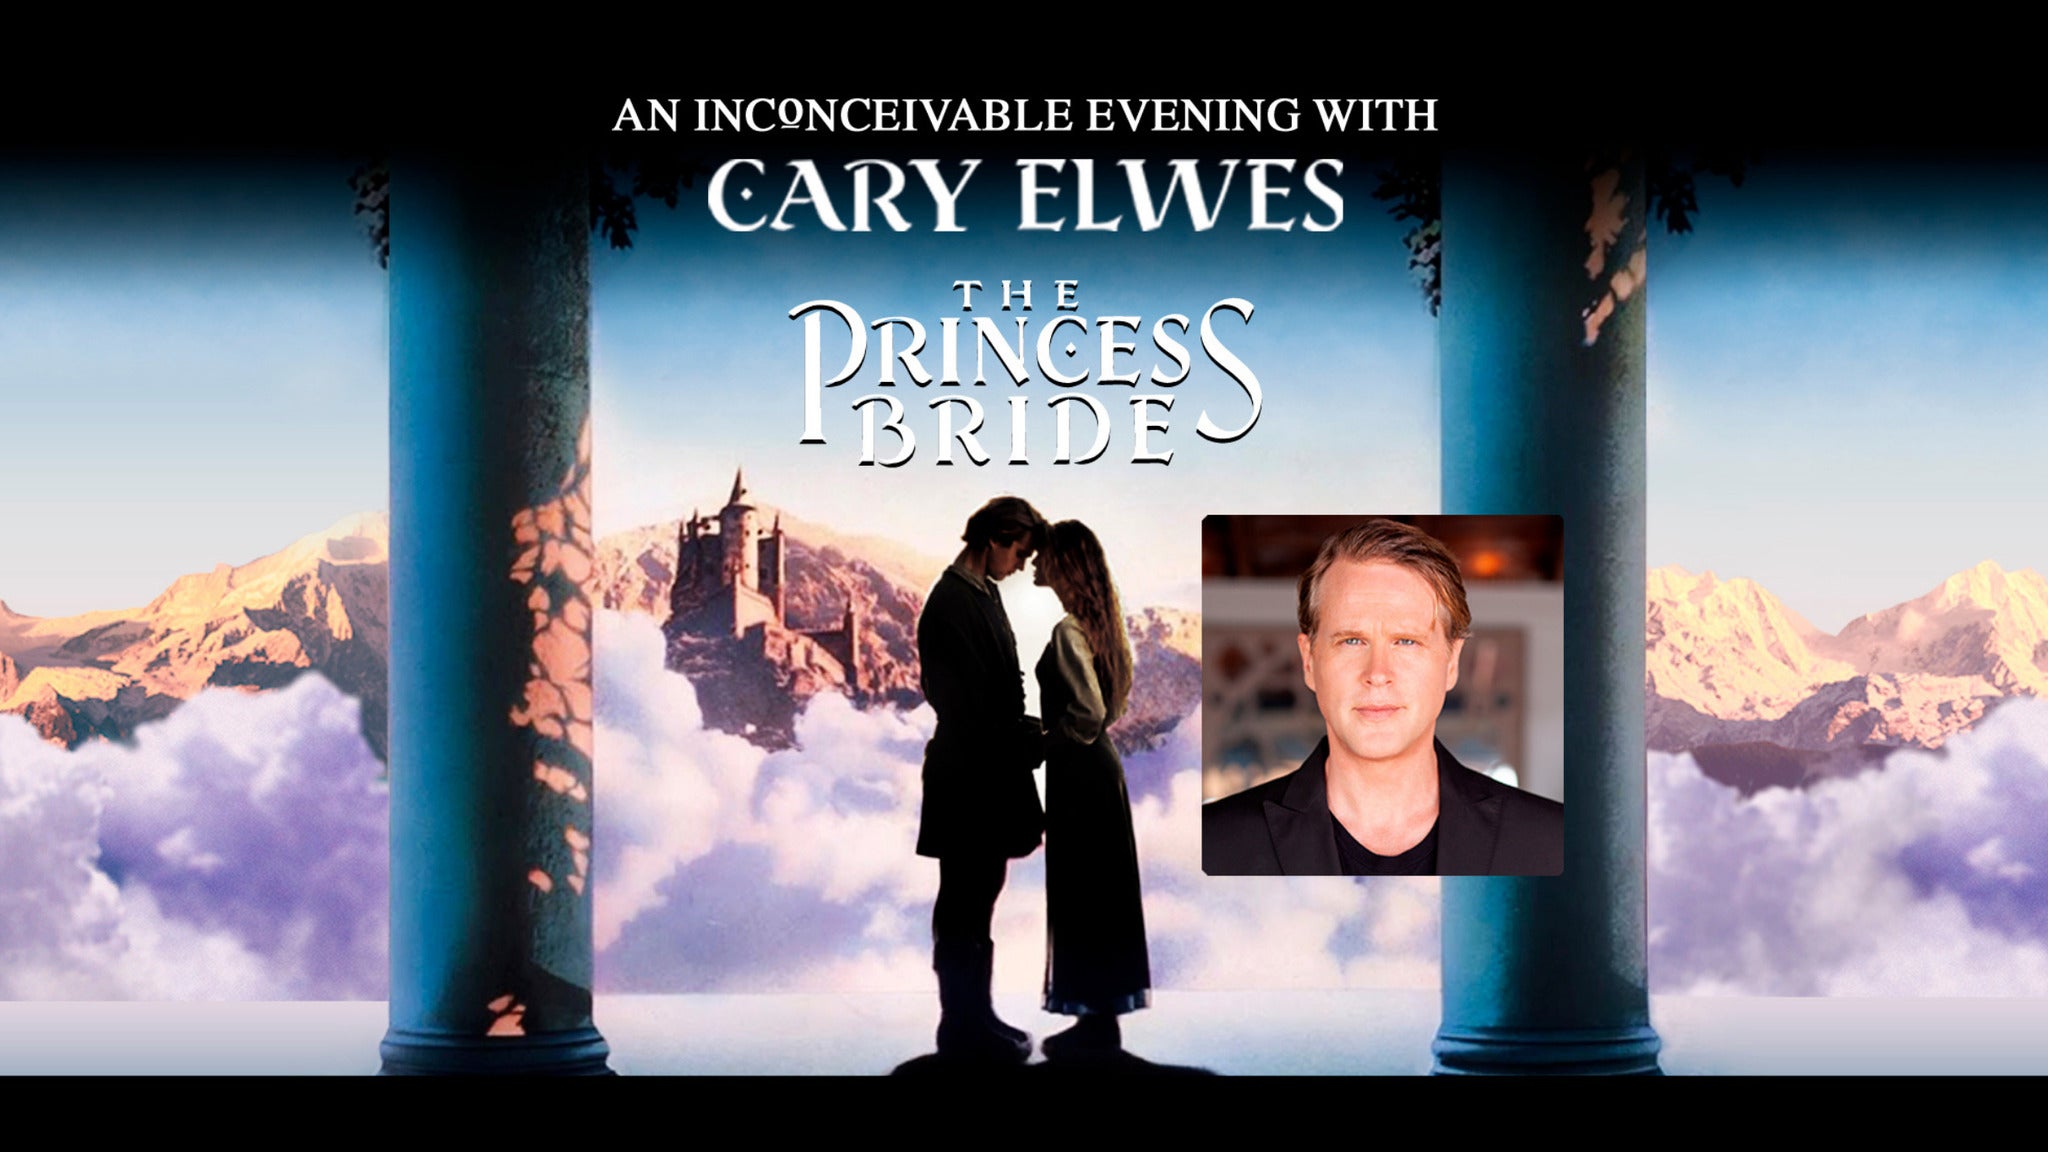 The Princess Bride: An Inconceivable Evening with Cary Elwes pre-sale password